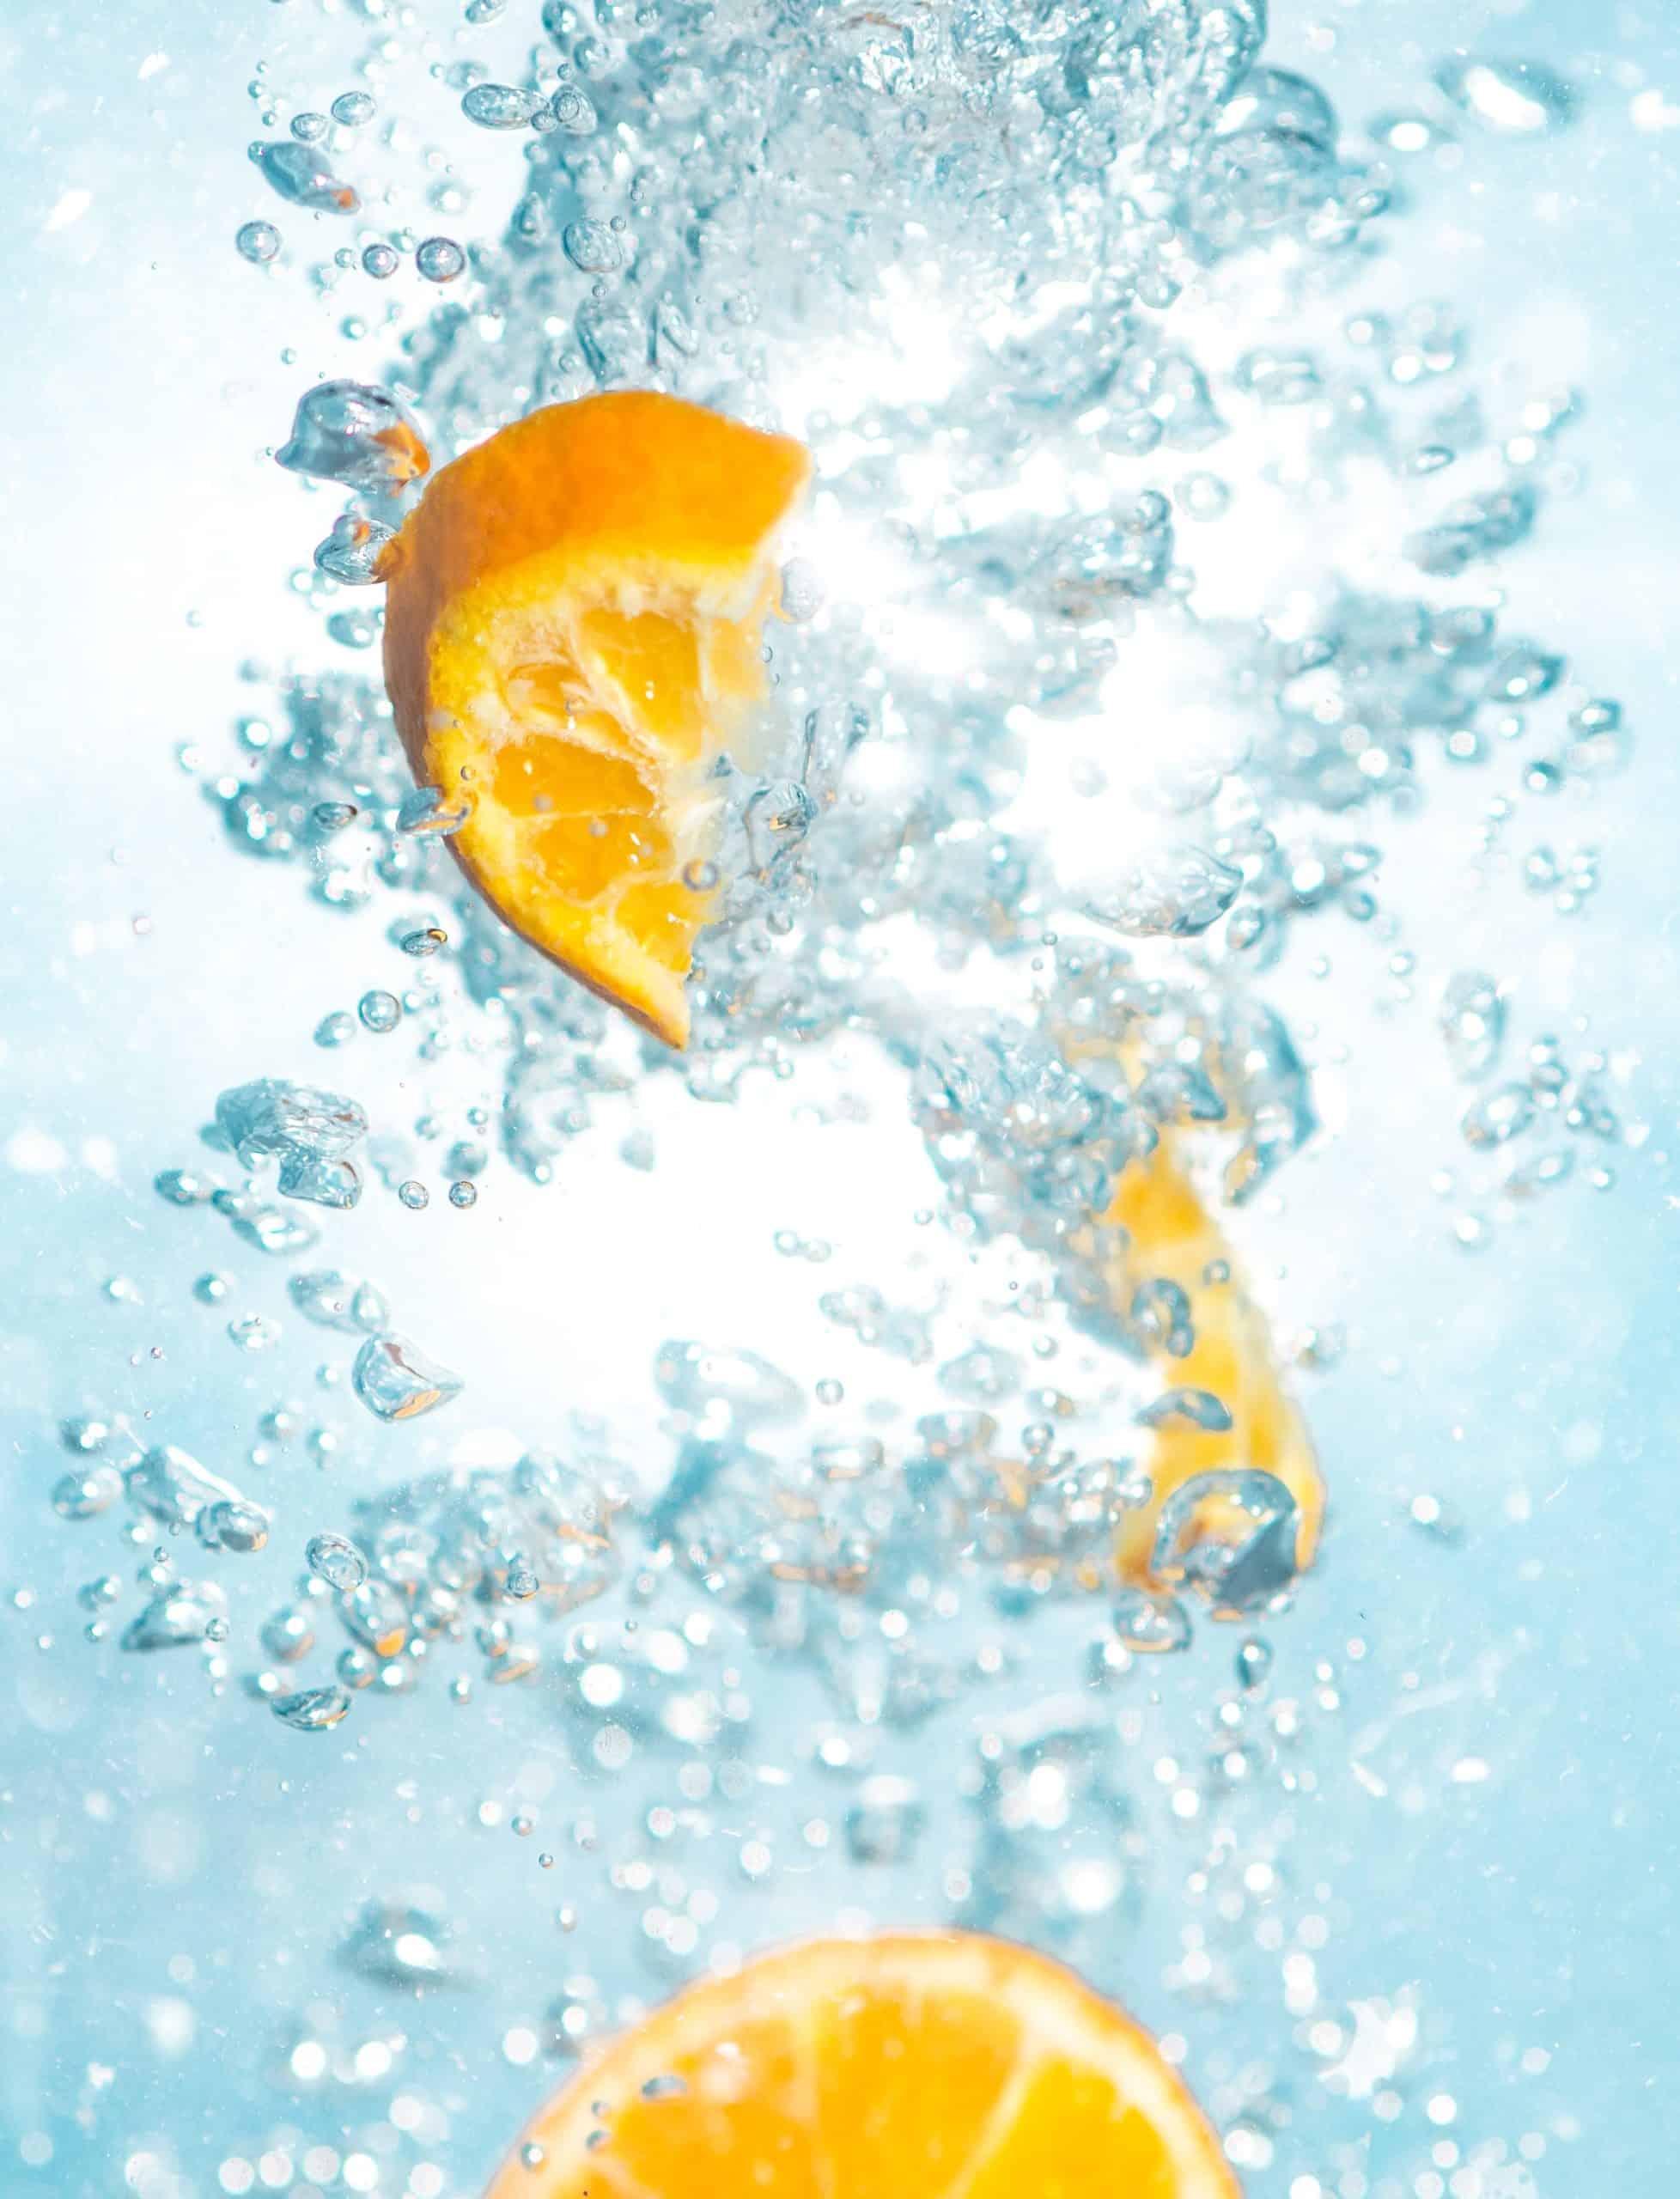 Water with Oranges - Staying hydrated in a Miami